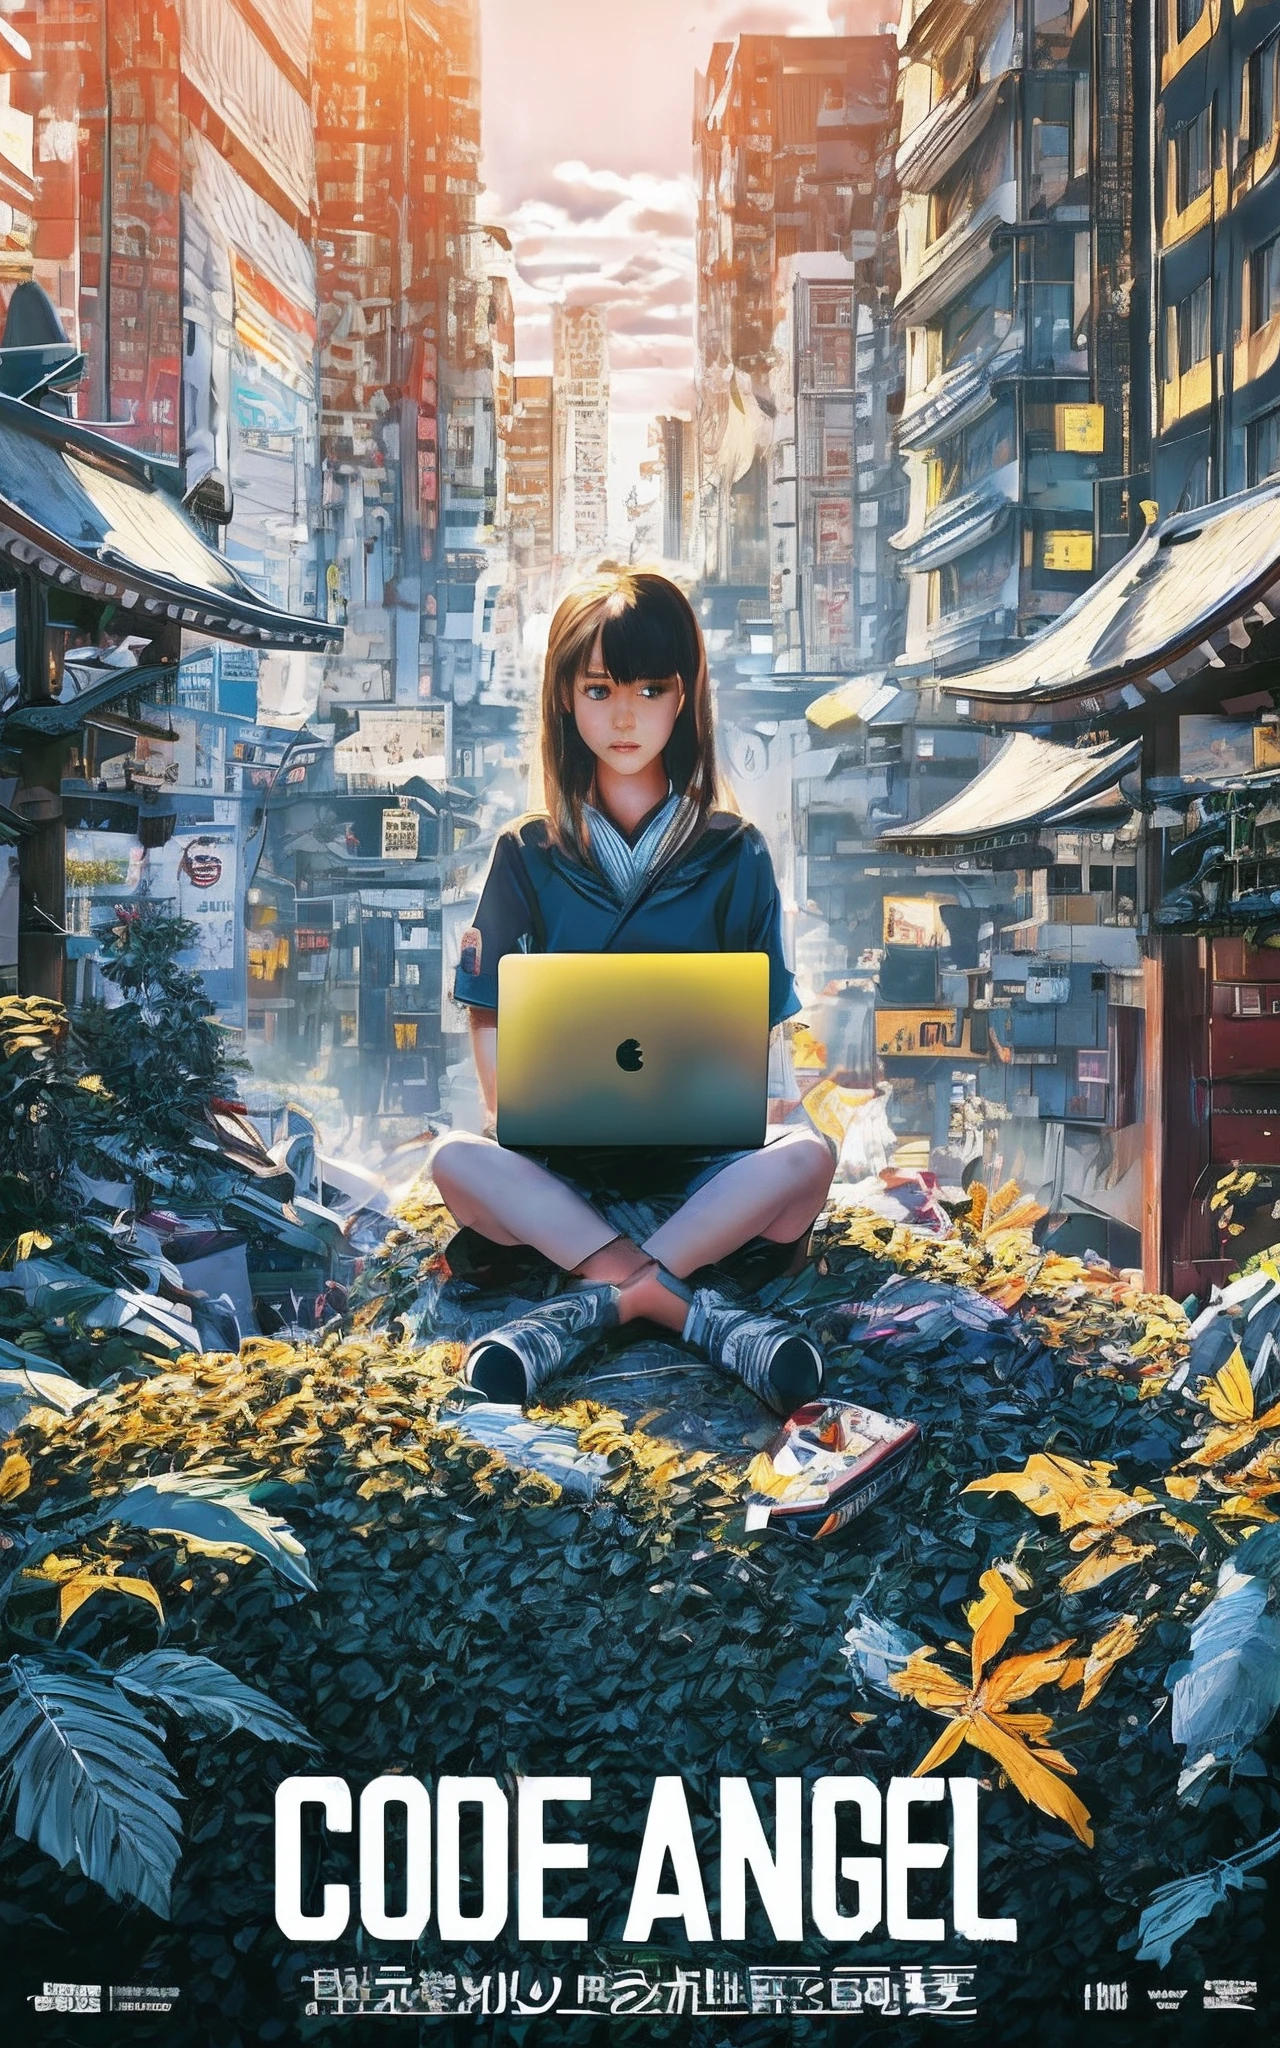 Movie Photography Movie Posters, Showing a 13-year-old girl sitting at a shrine in the valley between buildings in Akihabara, tokyo prefecture, Working with a laptop. The morning sun is shining. 8K, Best Rendering, Top Text Says "Code Angel"